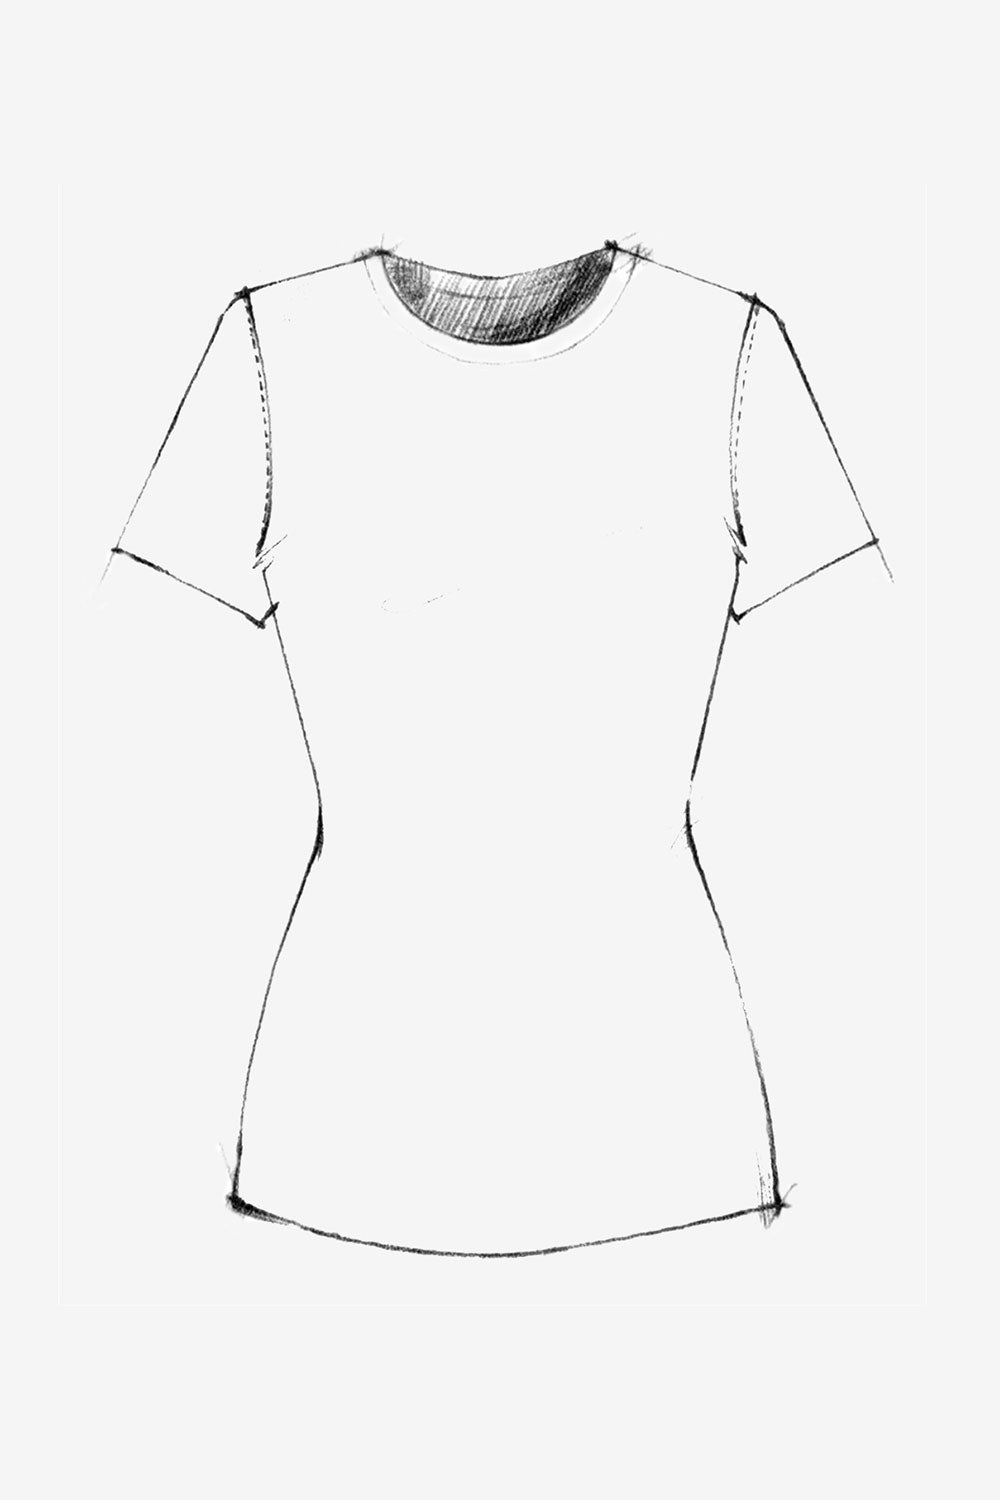 The School of Making The T-Shirt Top Pattern Women's DIY Clothing Pattern for Hand-Sewn T-Shirt Top.